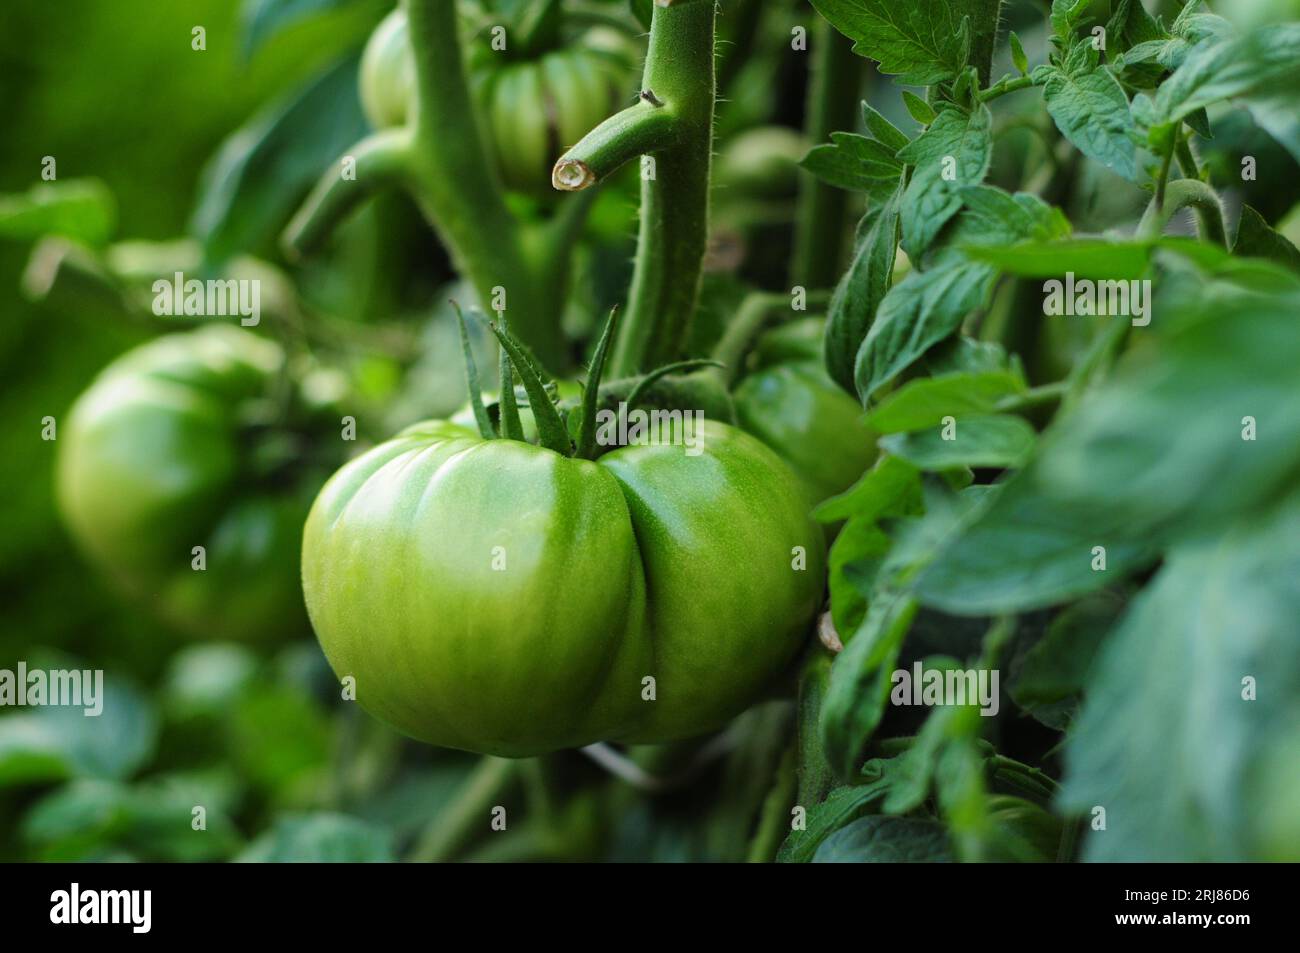 Large green tomatoes ripening on the vine Stock Photo